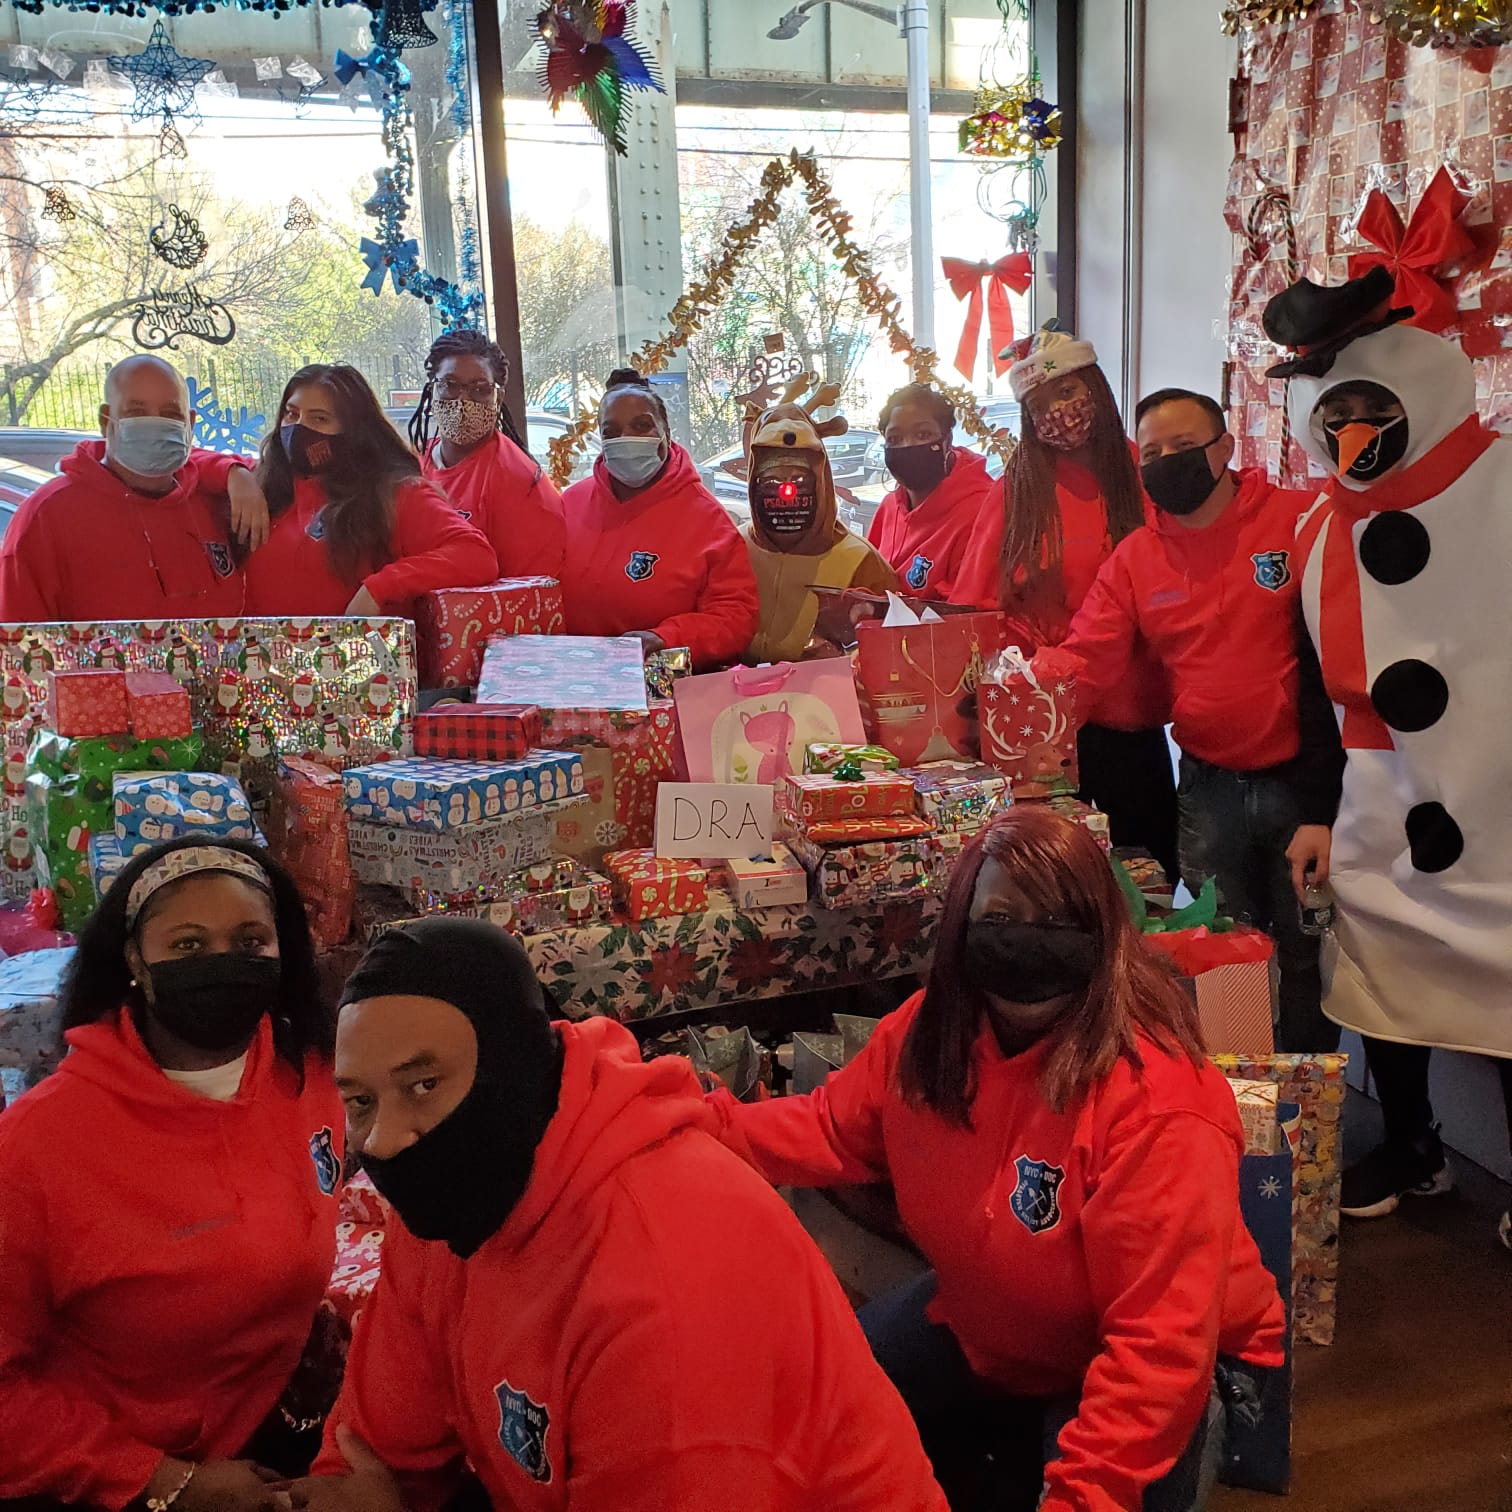 Our Annual Toy Drive was a success due to the volunteering of active and retired officers.